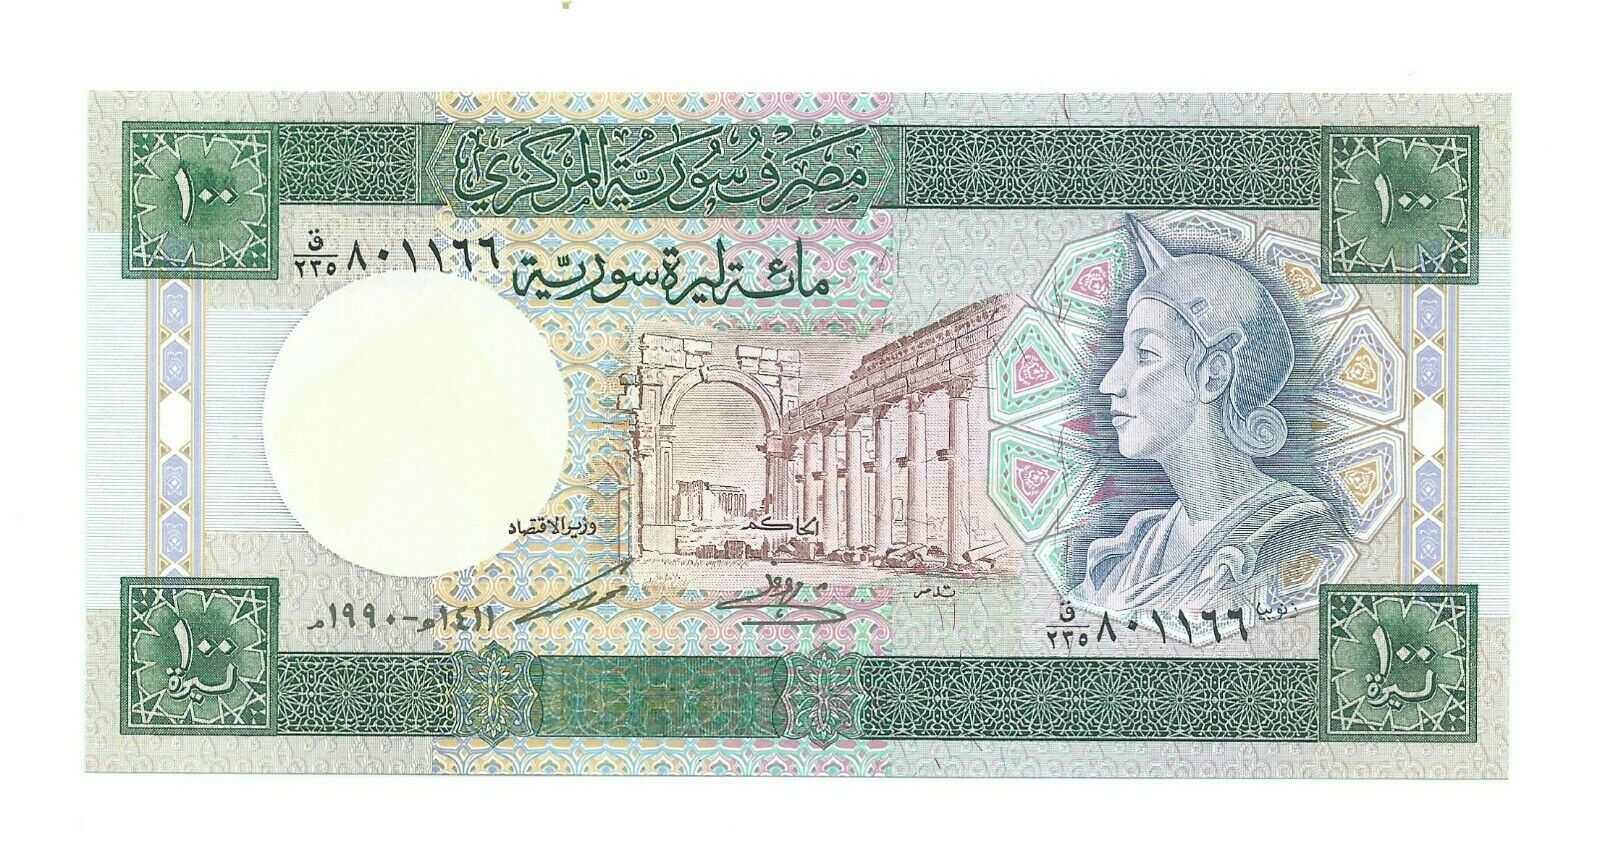 1990 Syria Banknote Collector 100 Pounds # 104